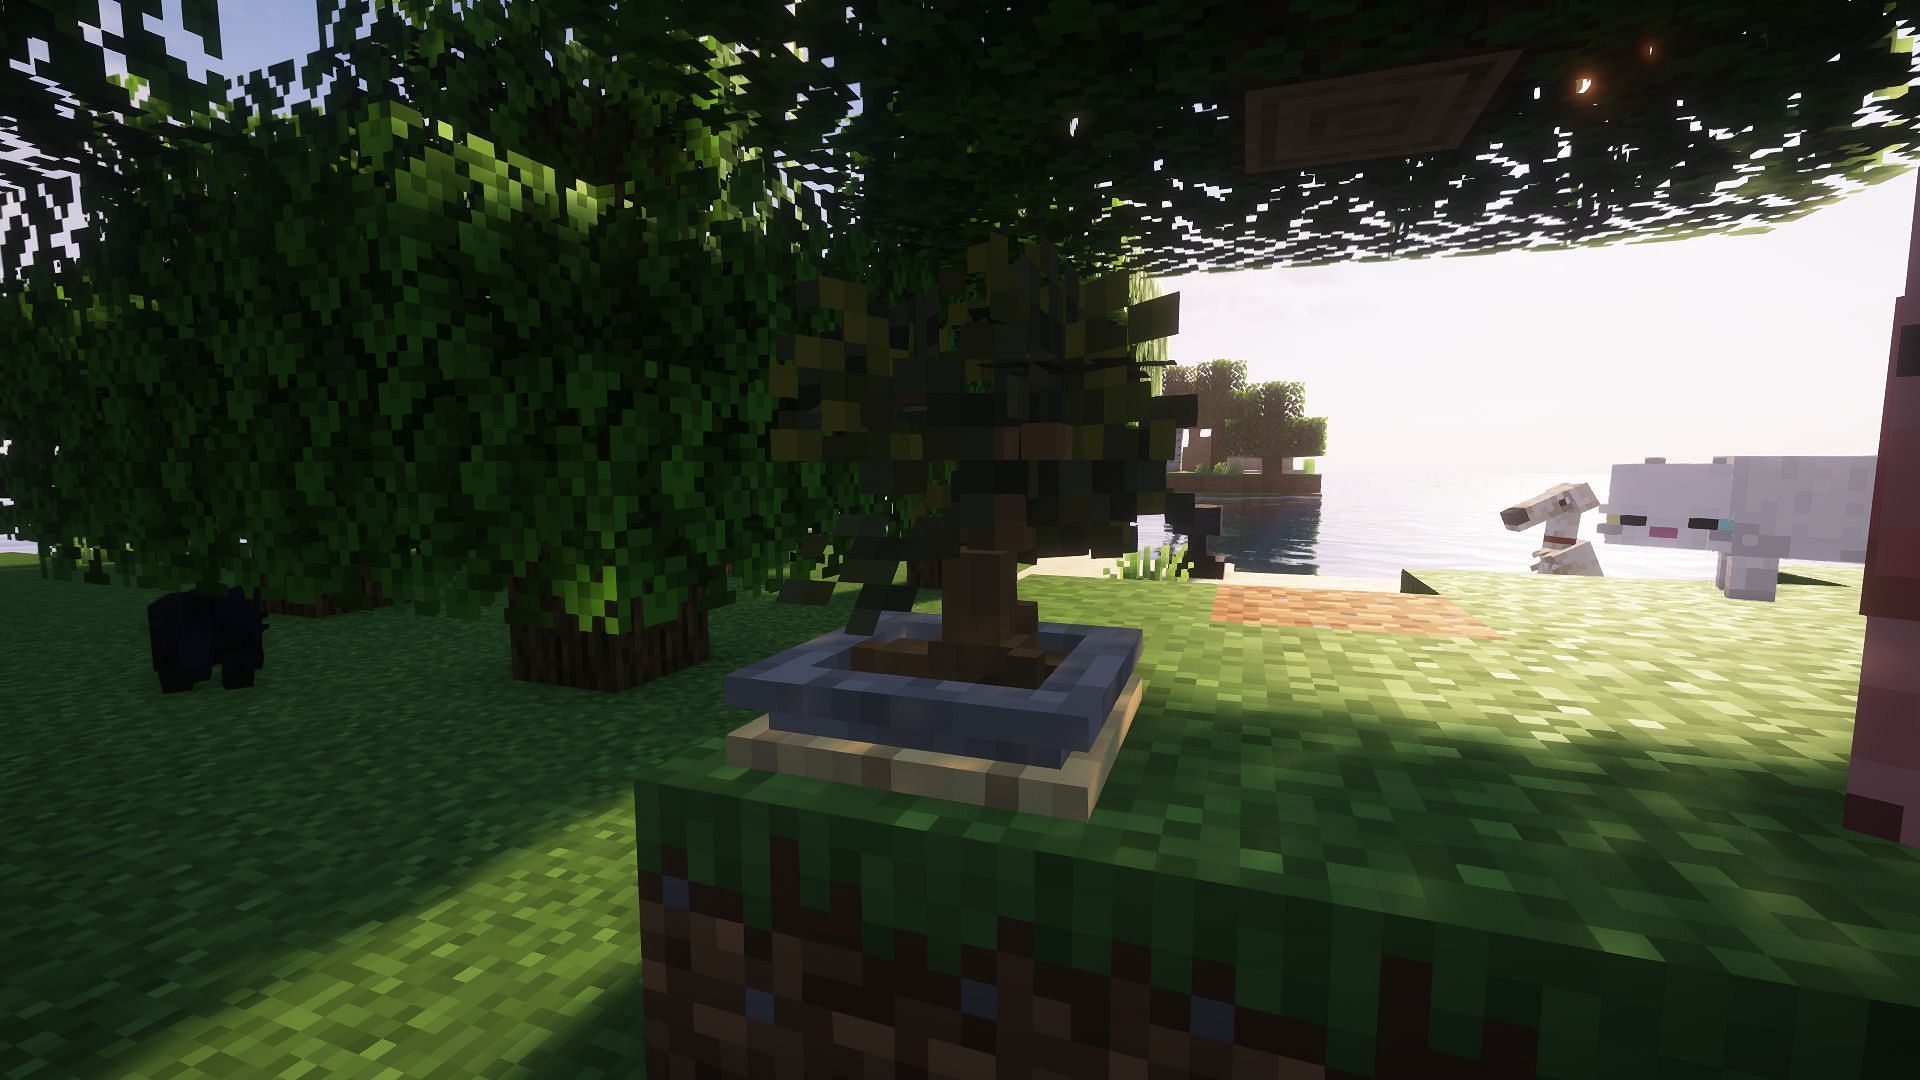 A cute little tree found in the resource pack. (Image via Mojang)